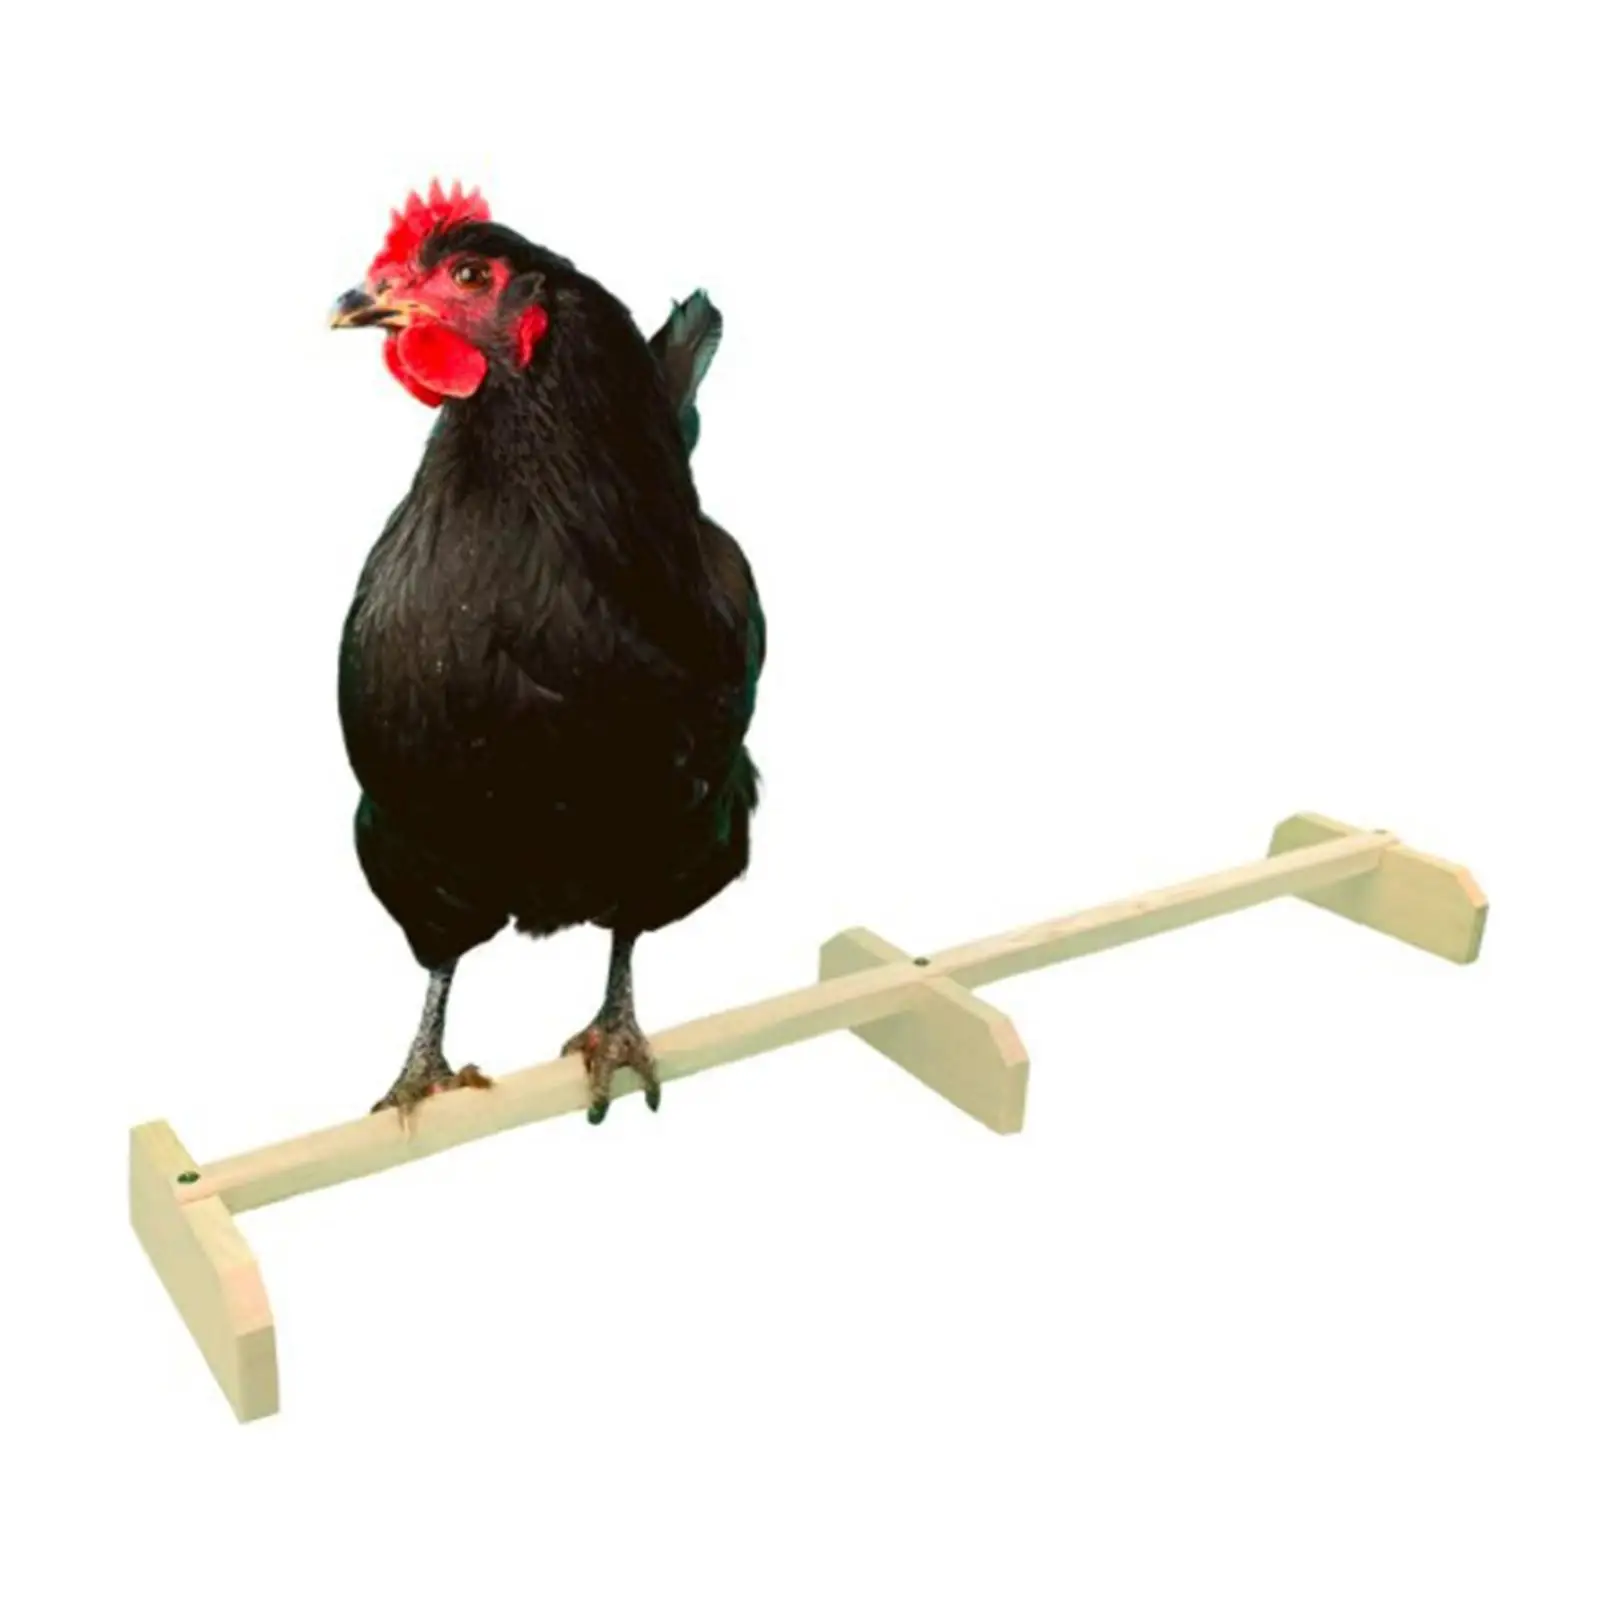 Chicken Perch Wooden Roosting Bar Bird Stand for Coop and Brooder for Large Bird Baby Chicks Parrots